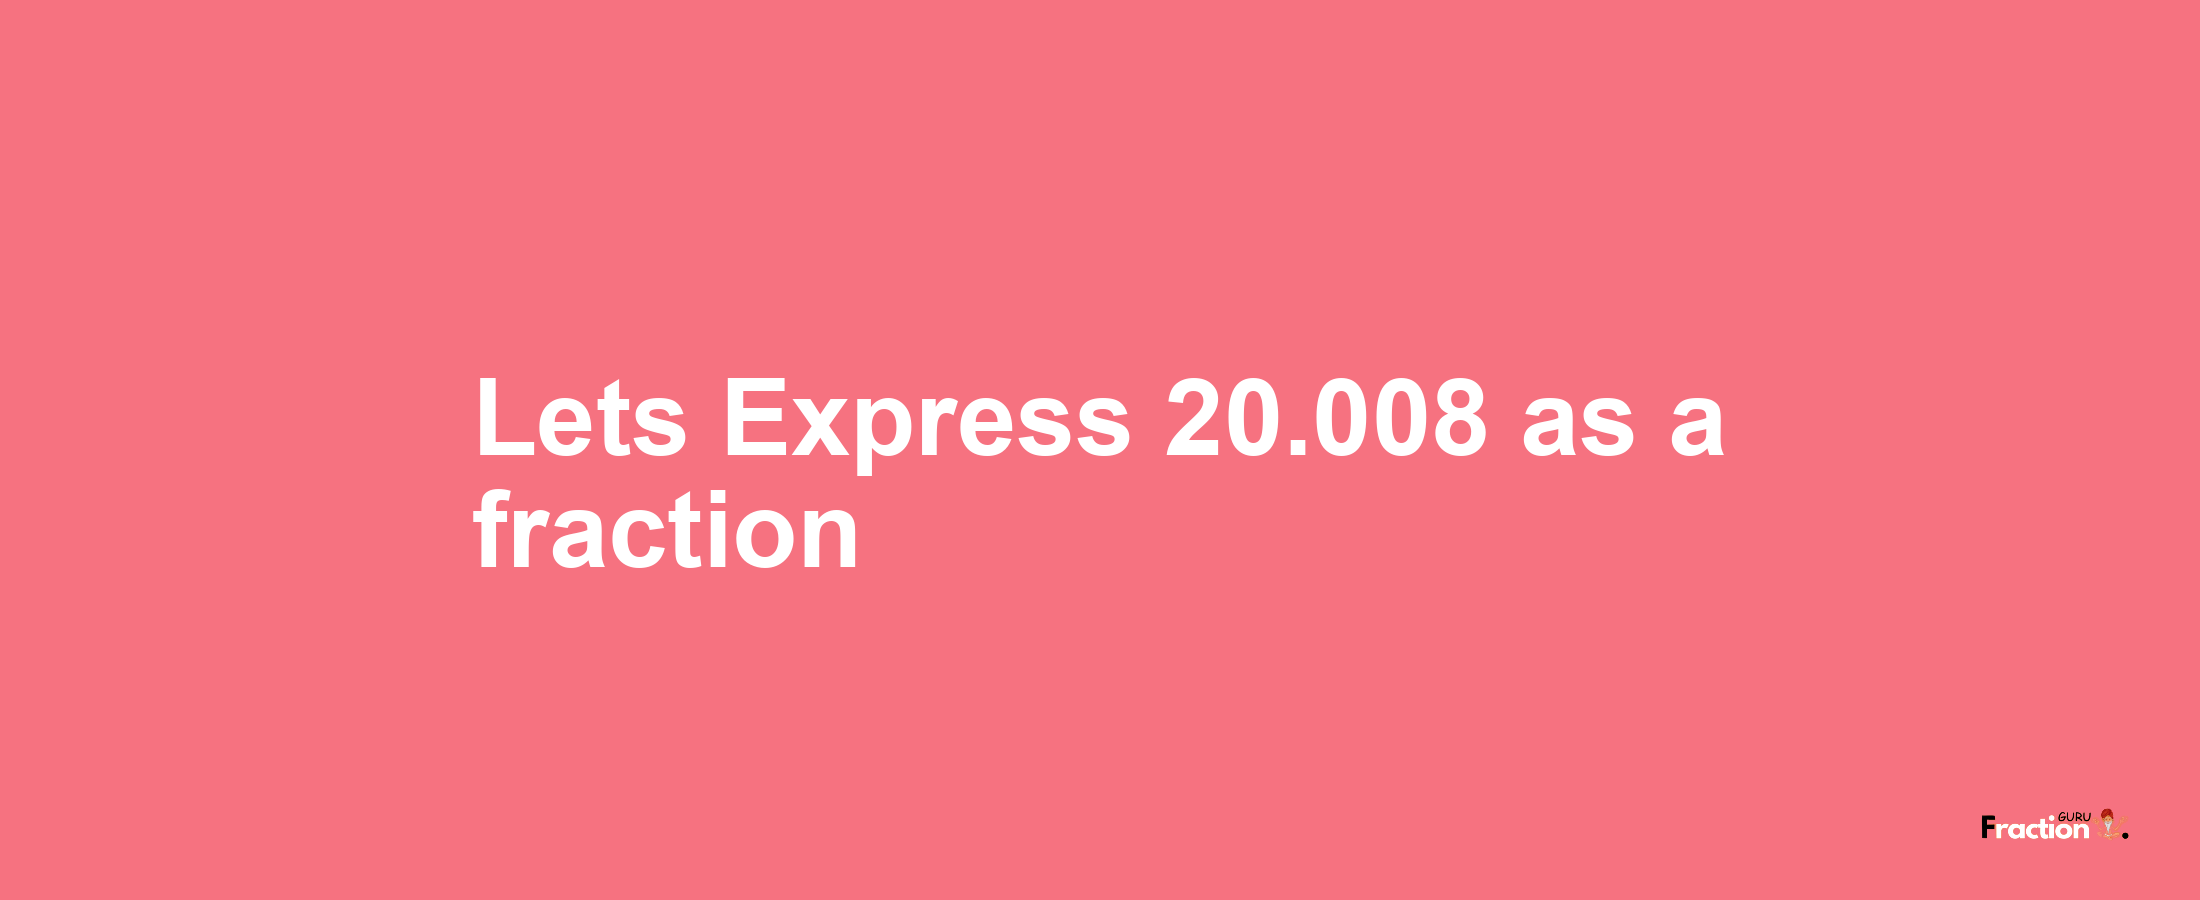 Lets Express 20.008 as afraction